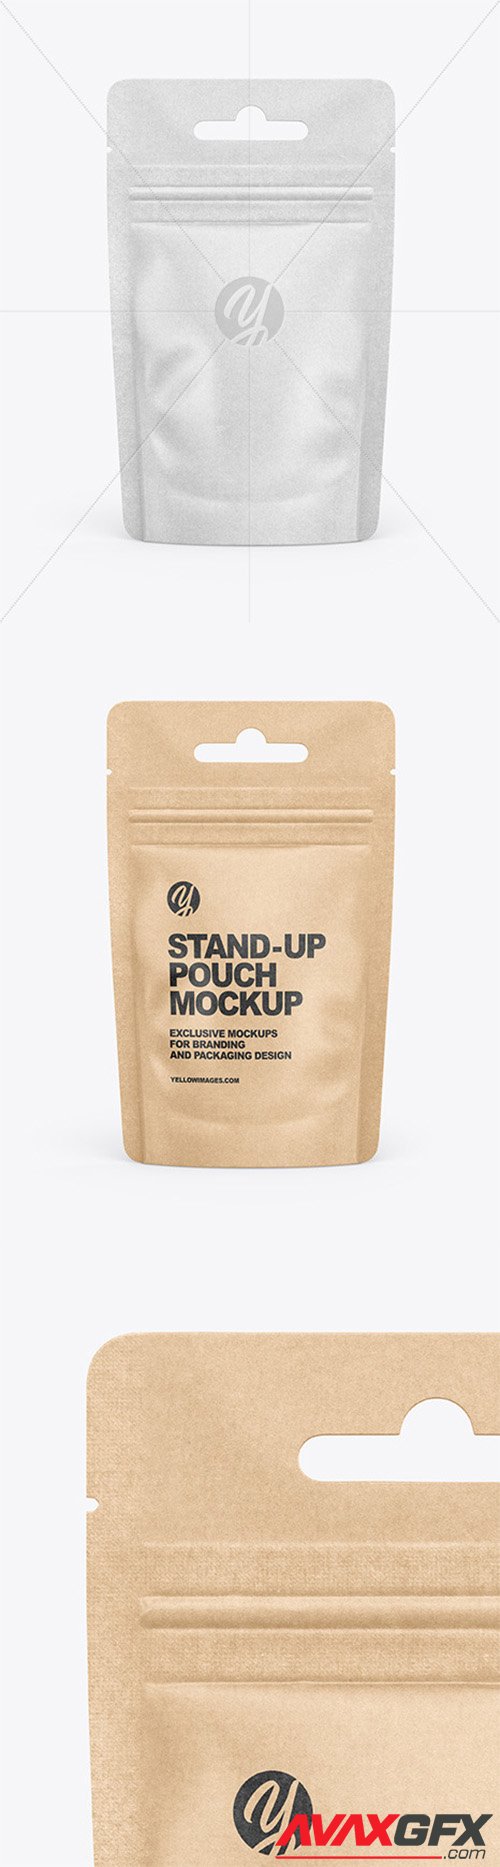 Kraft Stand-Up Pouch Mockup 66547